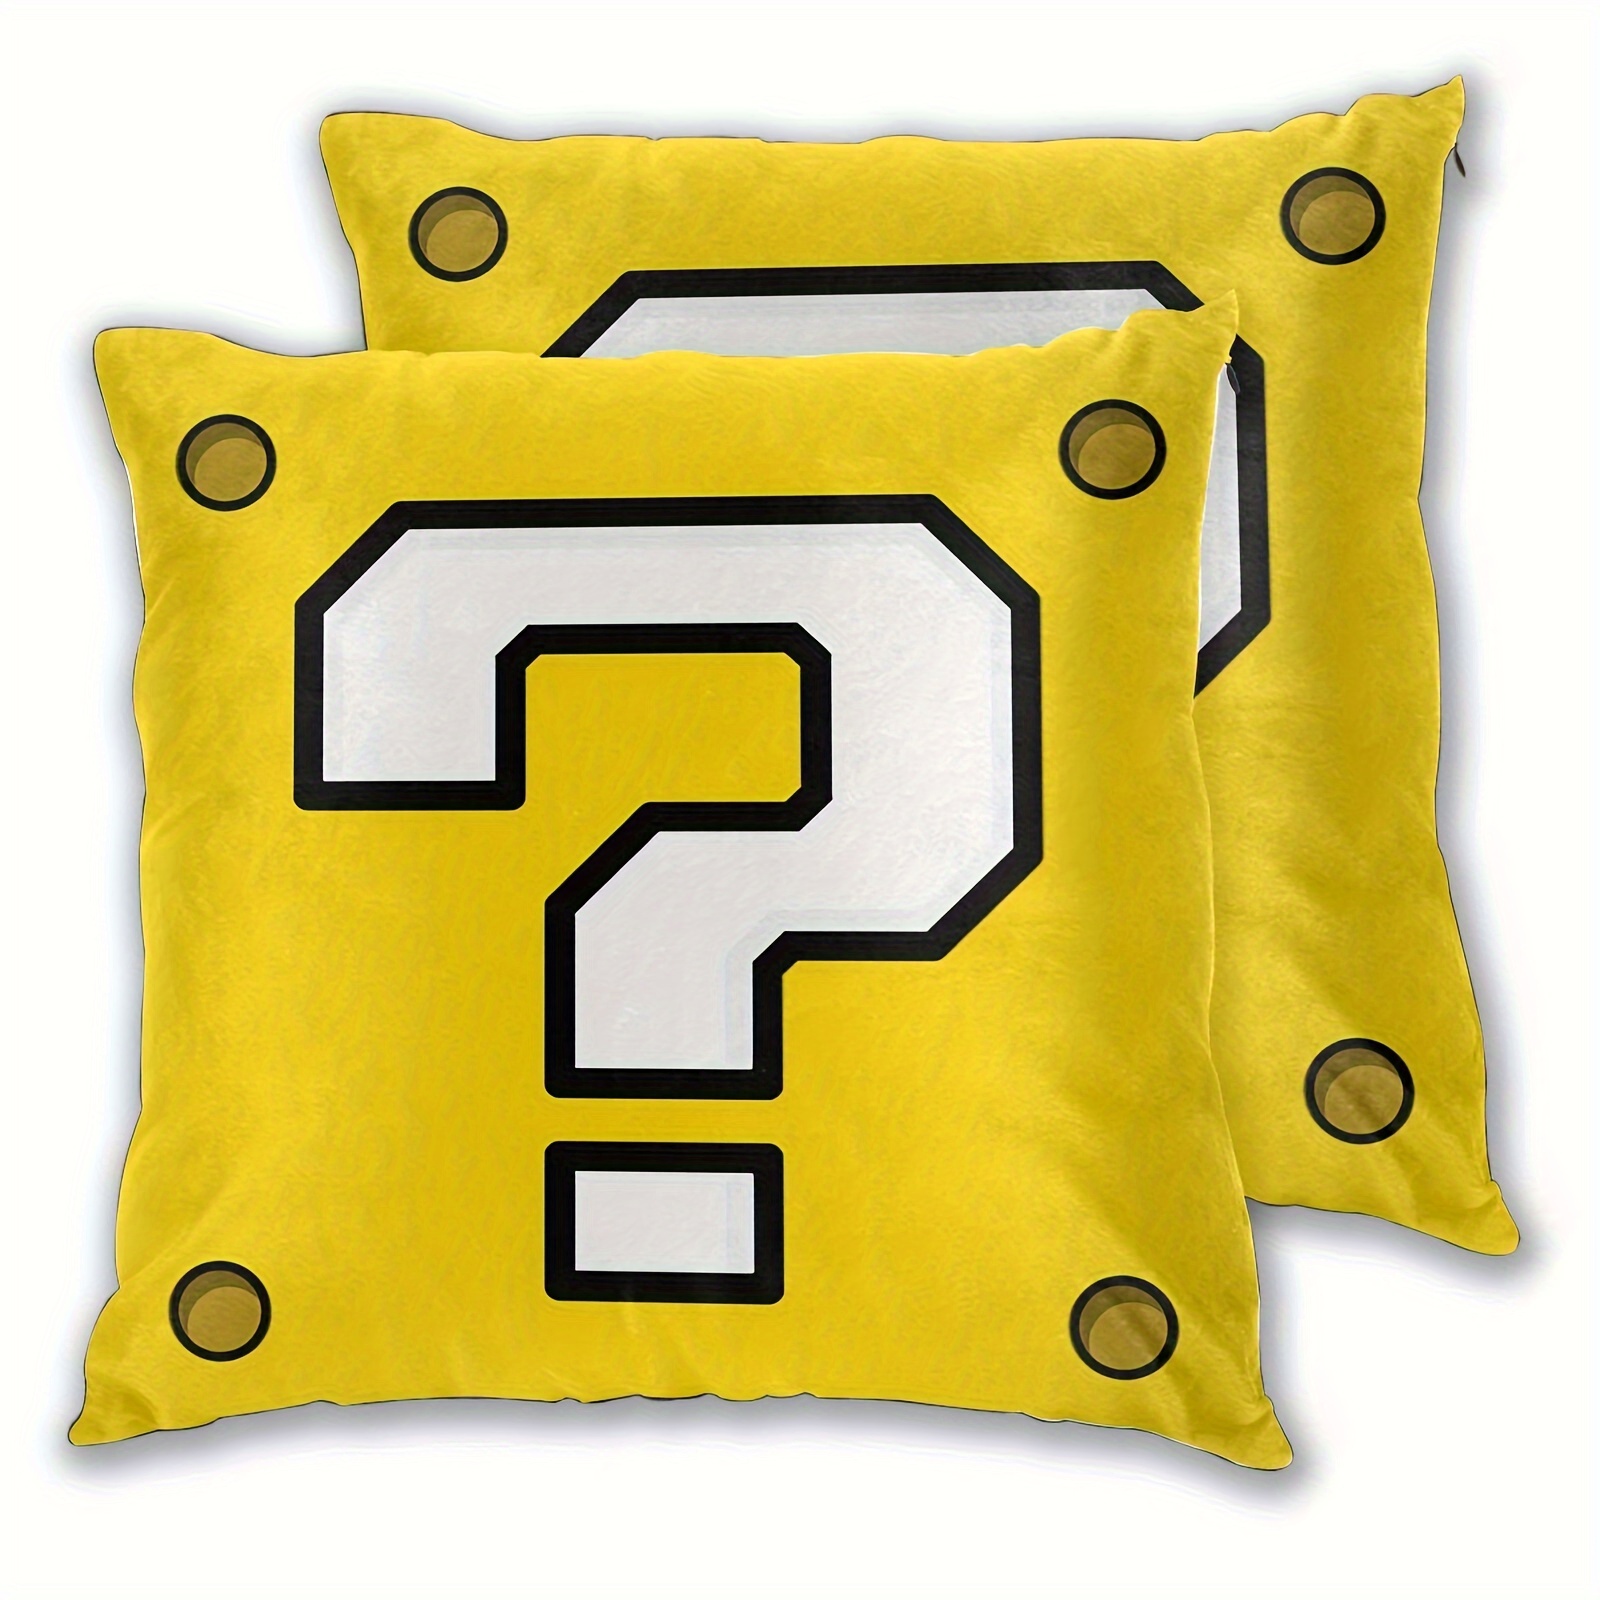 

2pcs Short Plush Question Block Throw Pillow Covers 18x18 Inch Home Decor Old School Gamer Low Poly Art Pillowcase Decorative Cushion Covers For Sofa Bed Room No Pillow Core